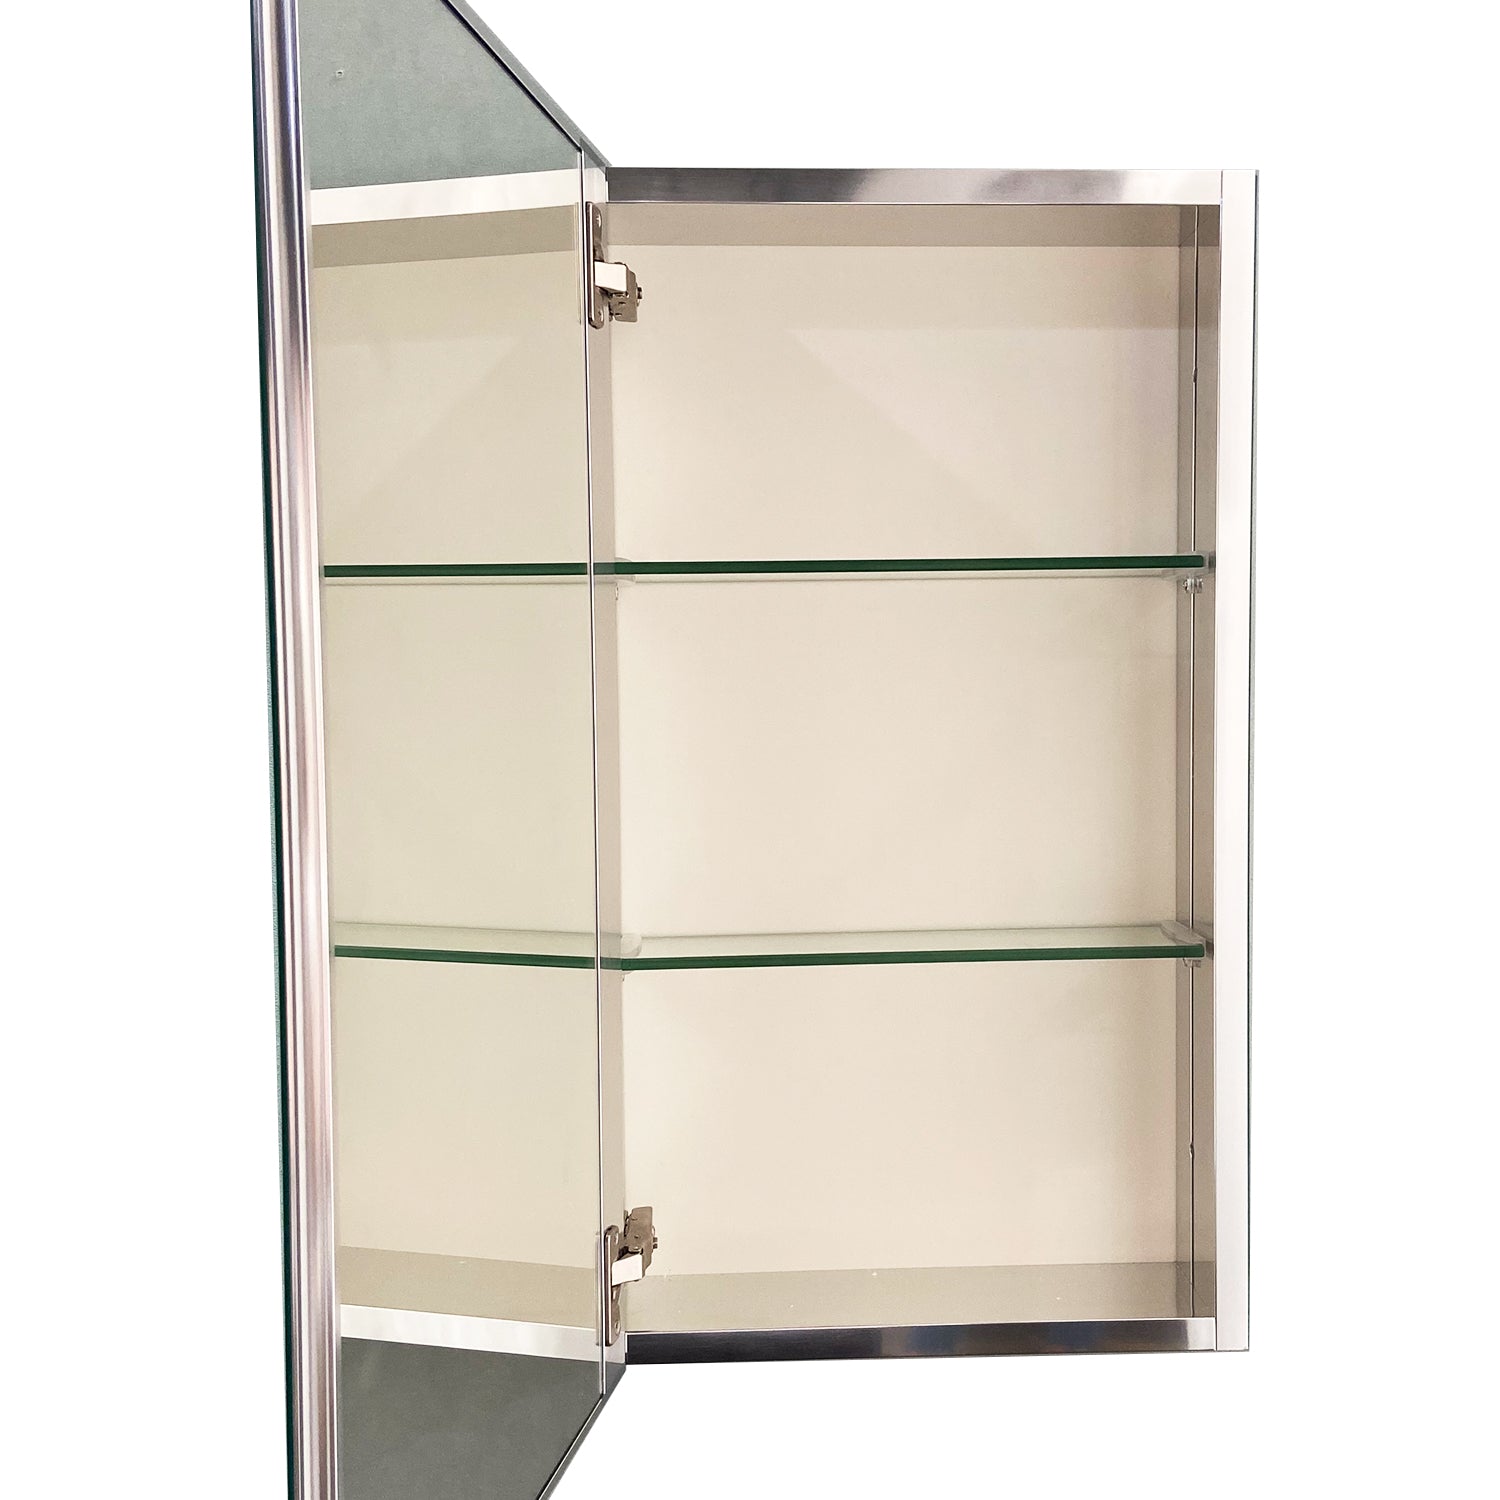 15 x 26 in. Rectangular Silver Aluminum Recessed/Surface Mount Medicine Cabinet with Mirror